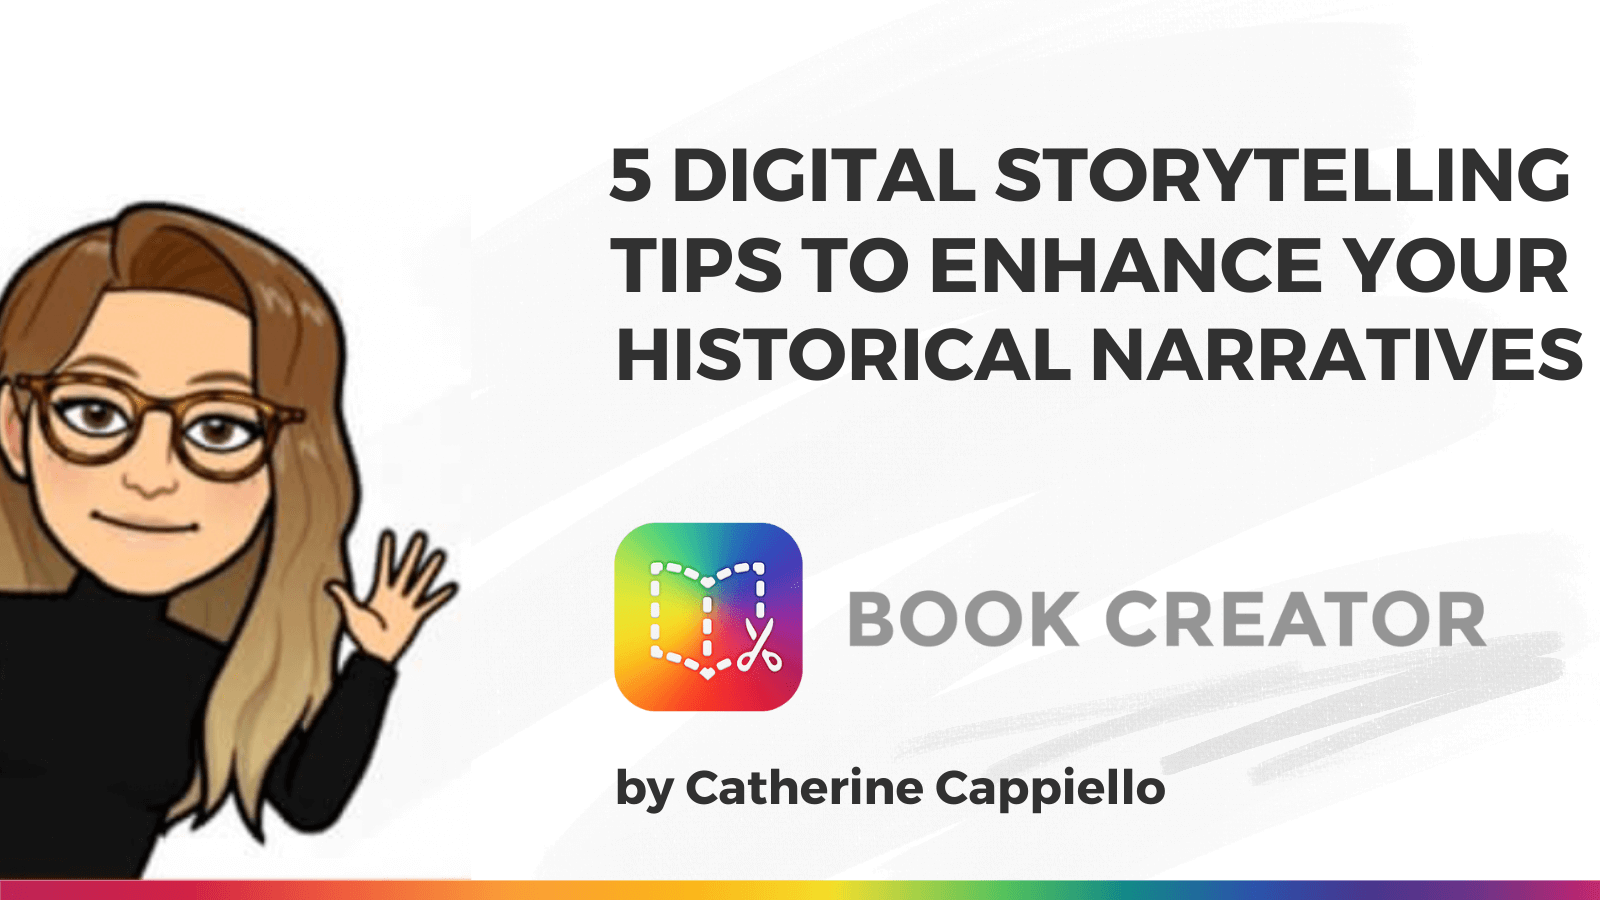 Featured image for “5 digital storytelling tips to enhance your historical narratives”